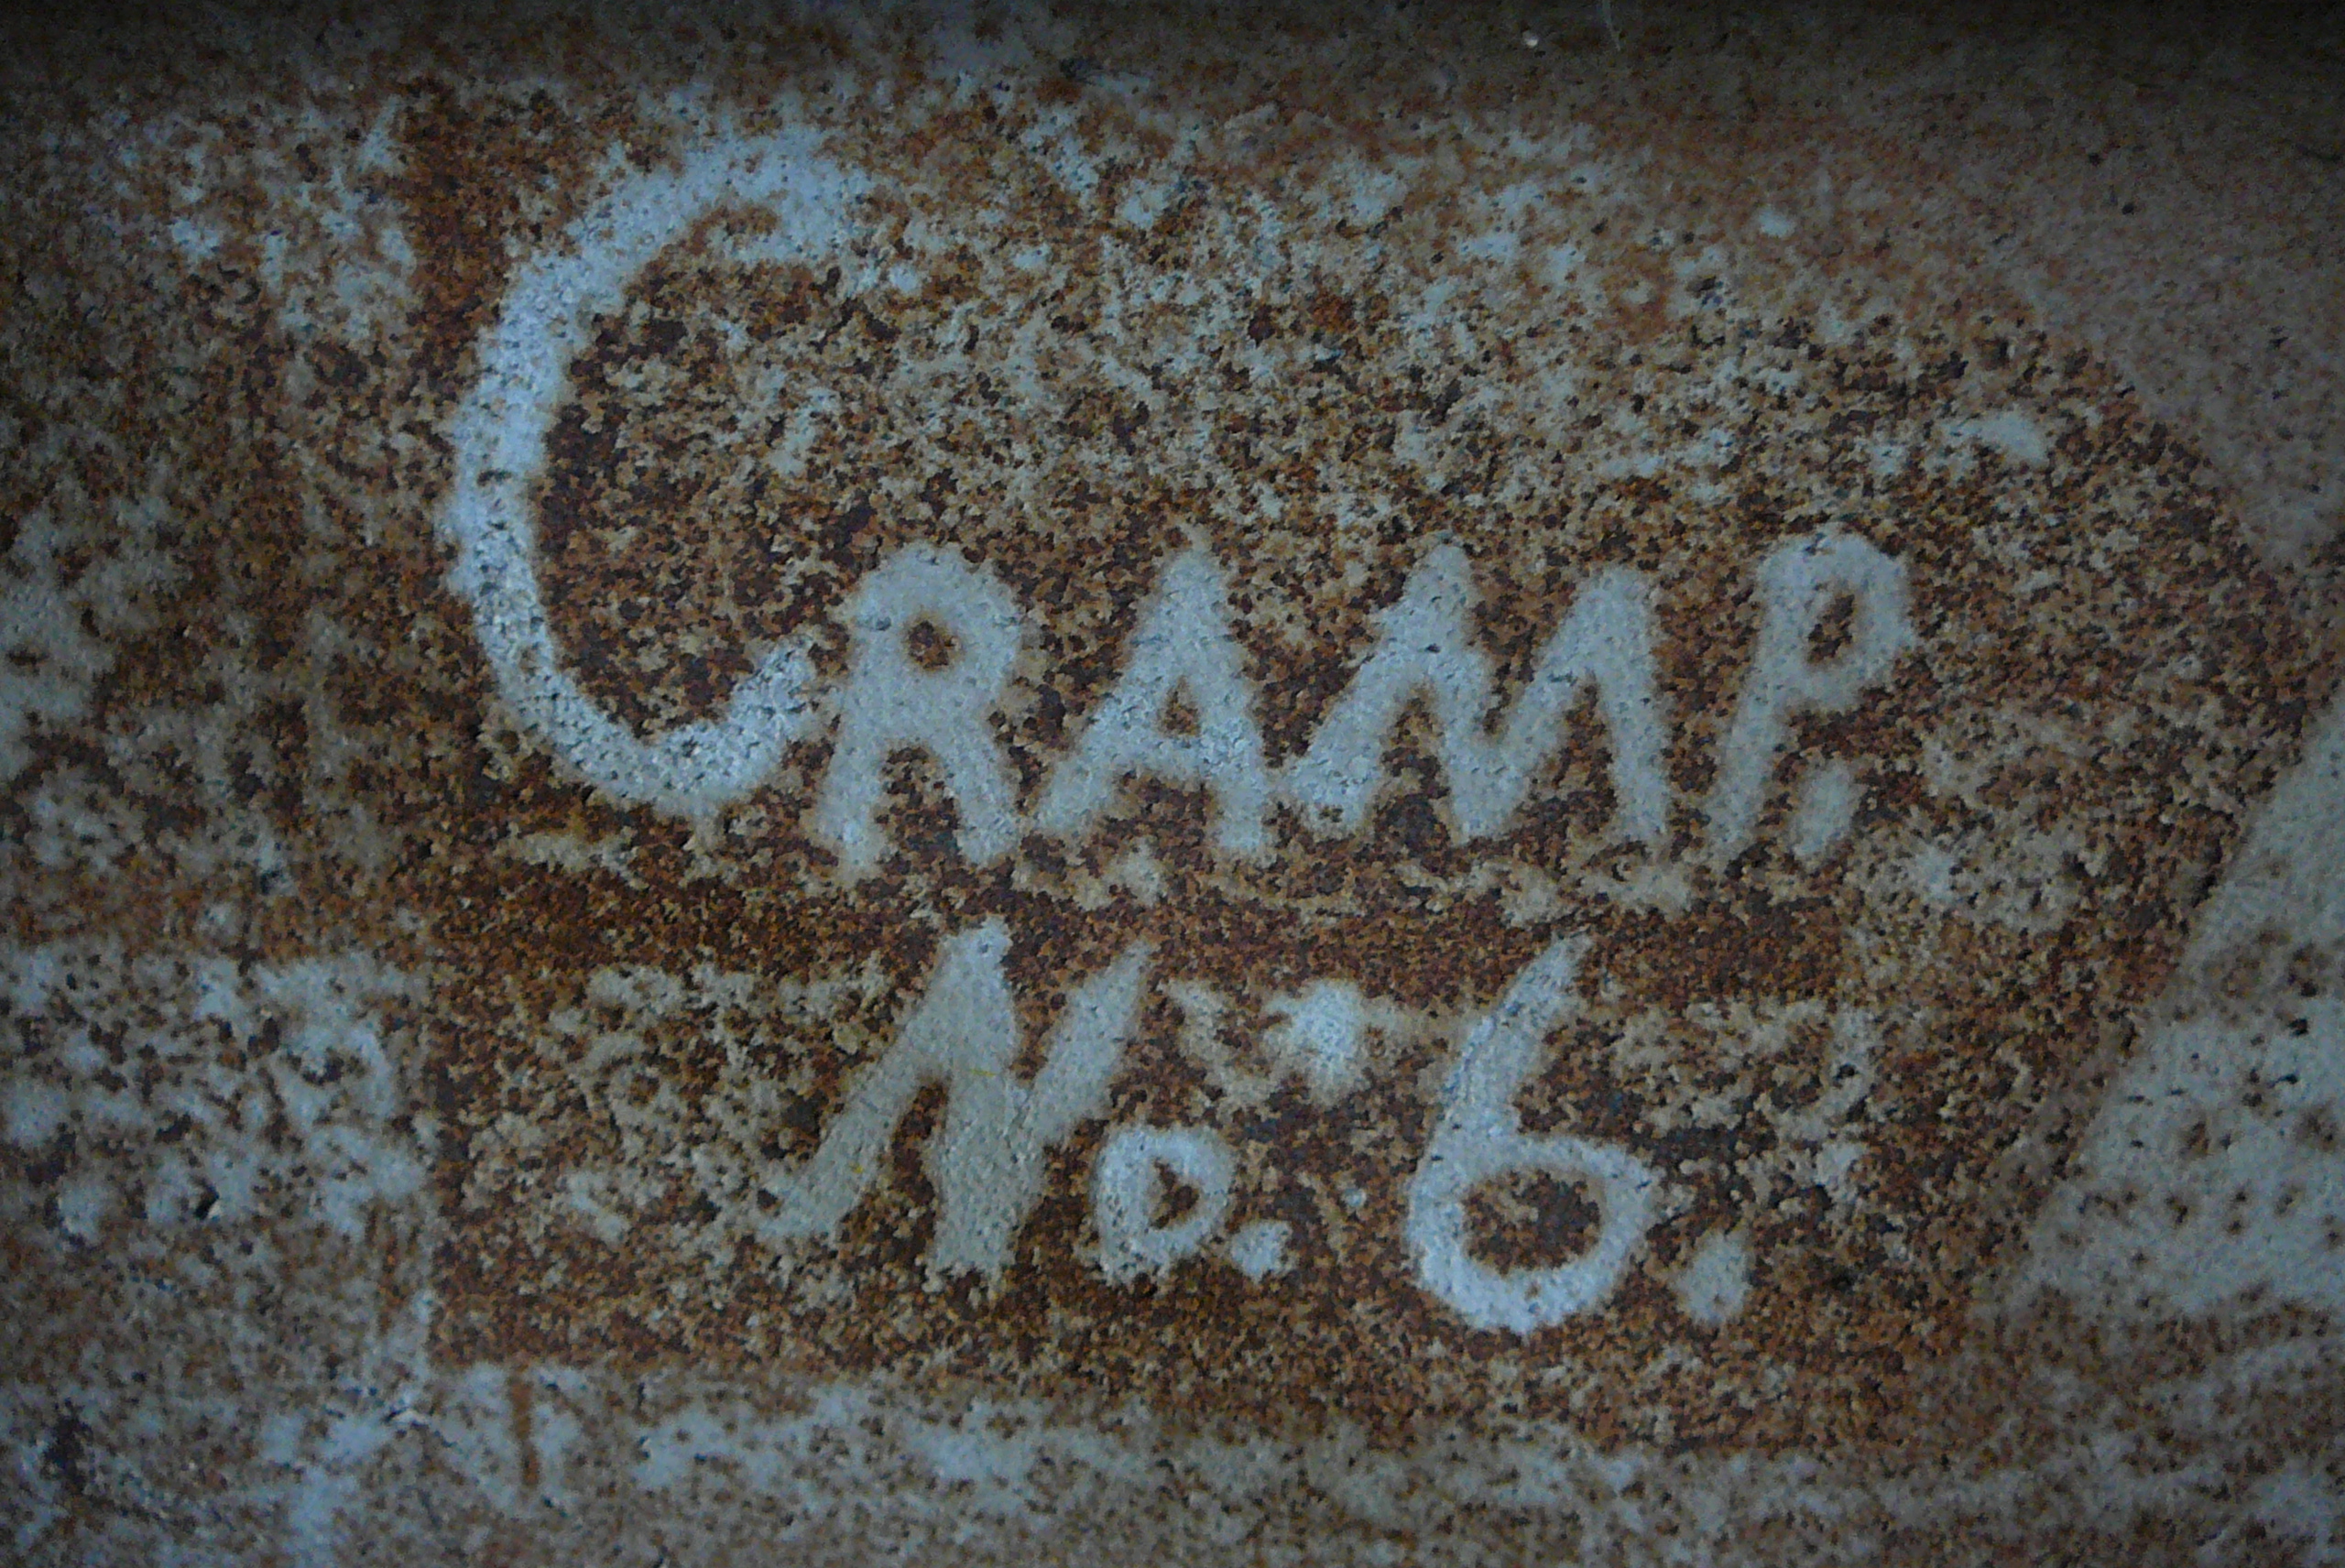 Wax from crayon left message on Cramp's beam